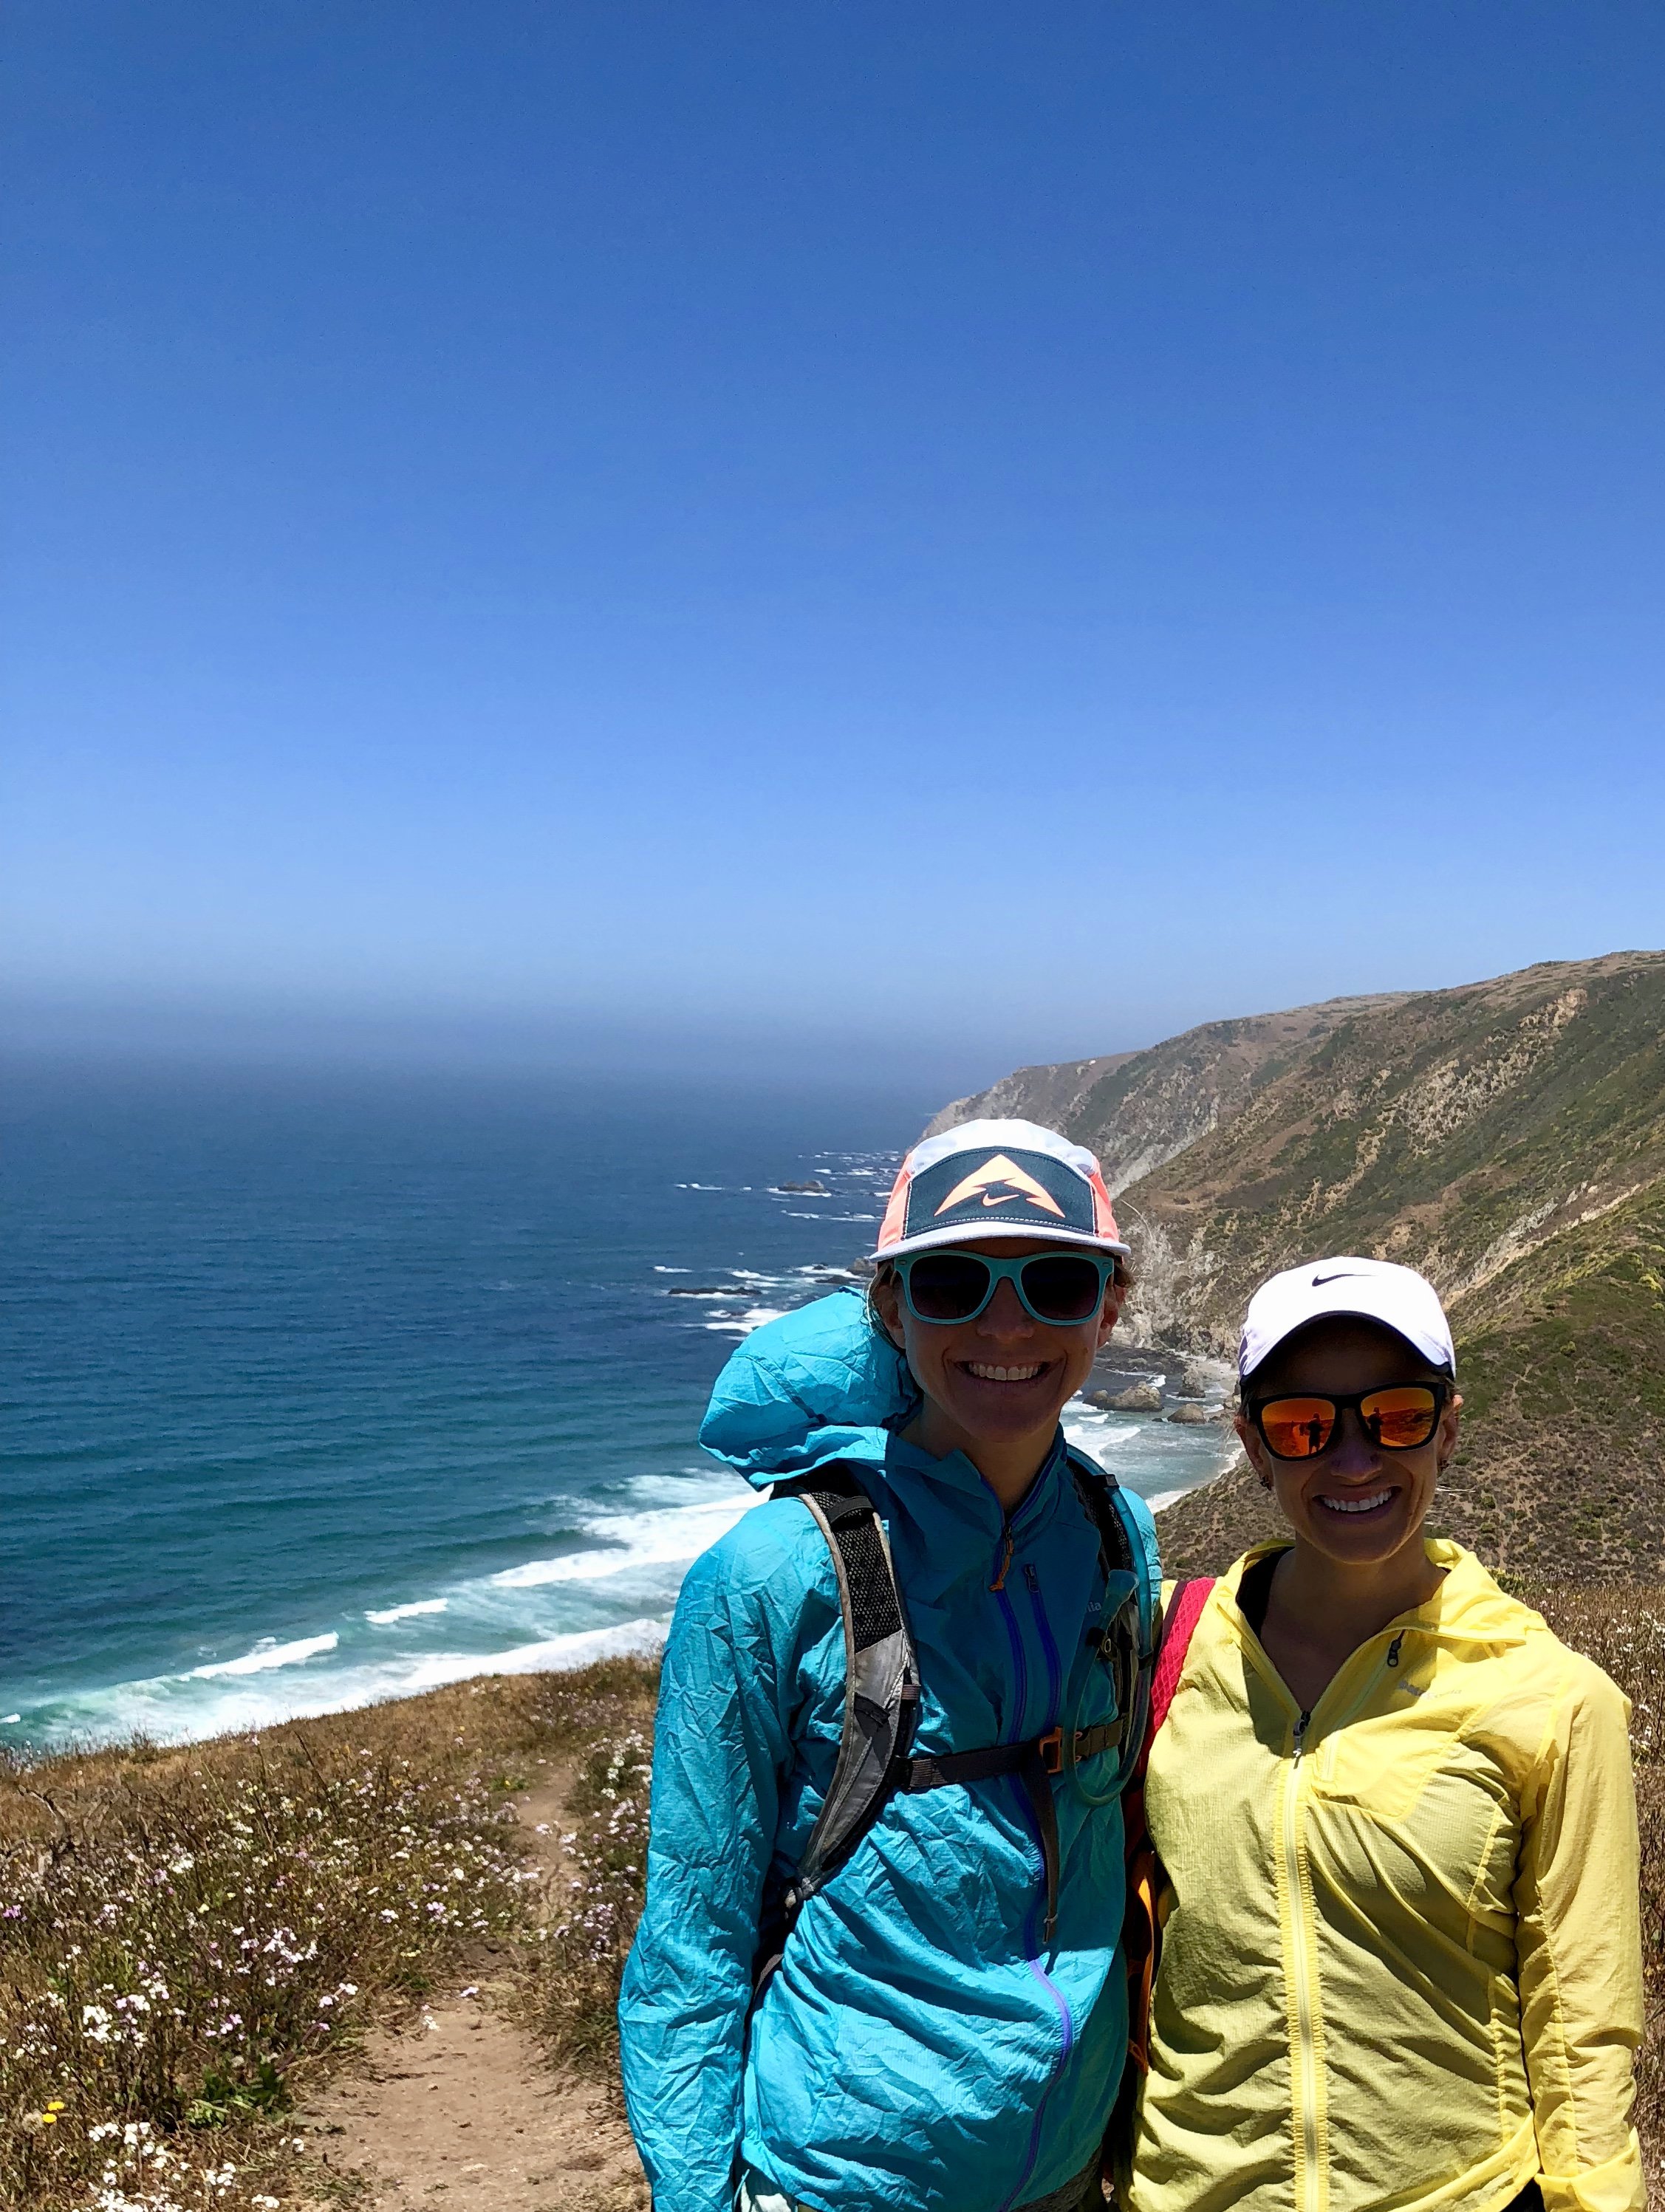 Tomales Point Trail